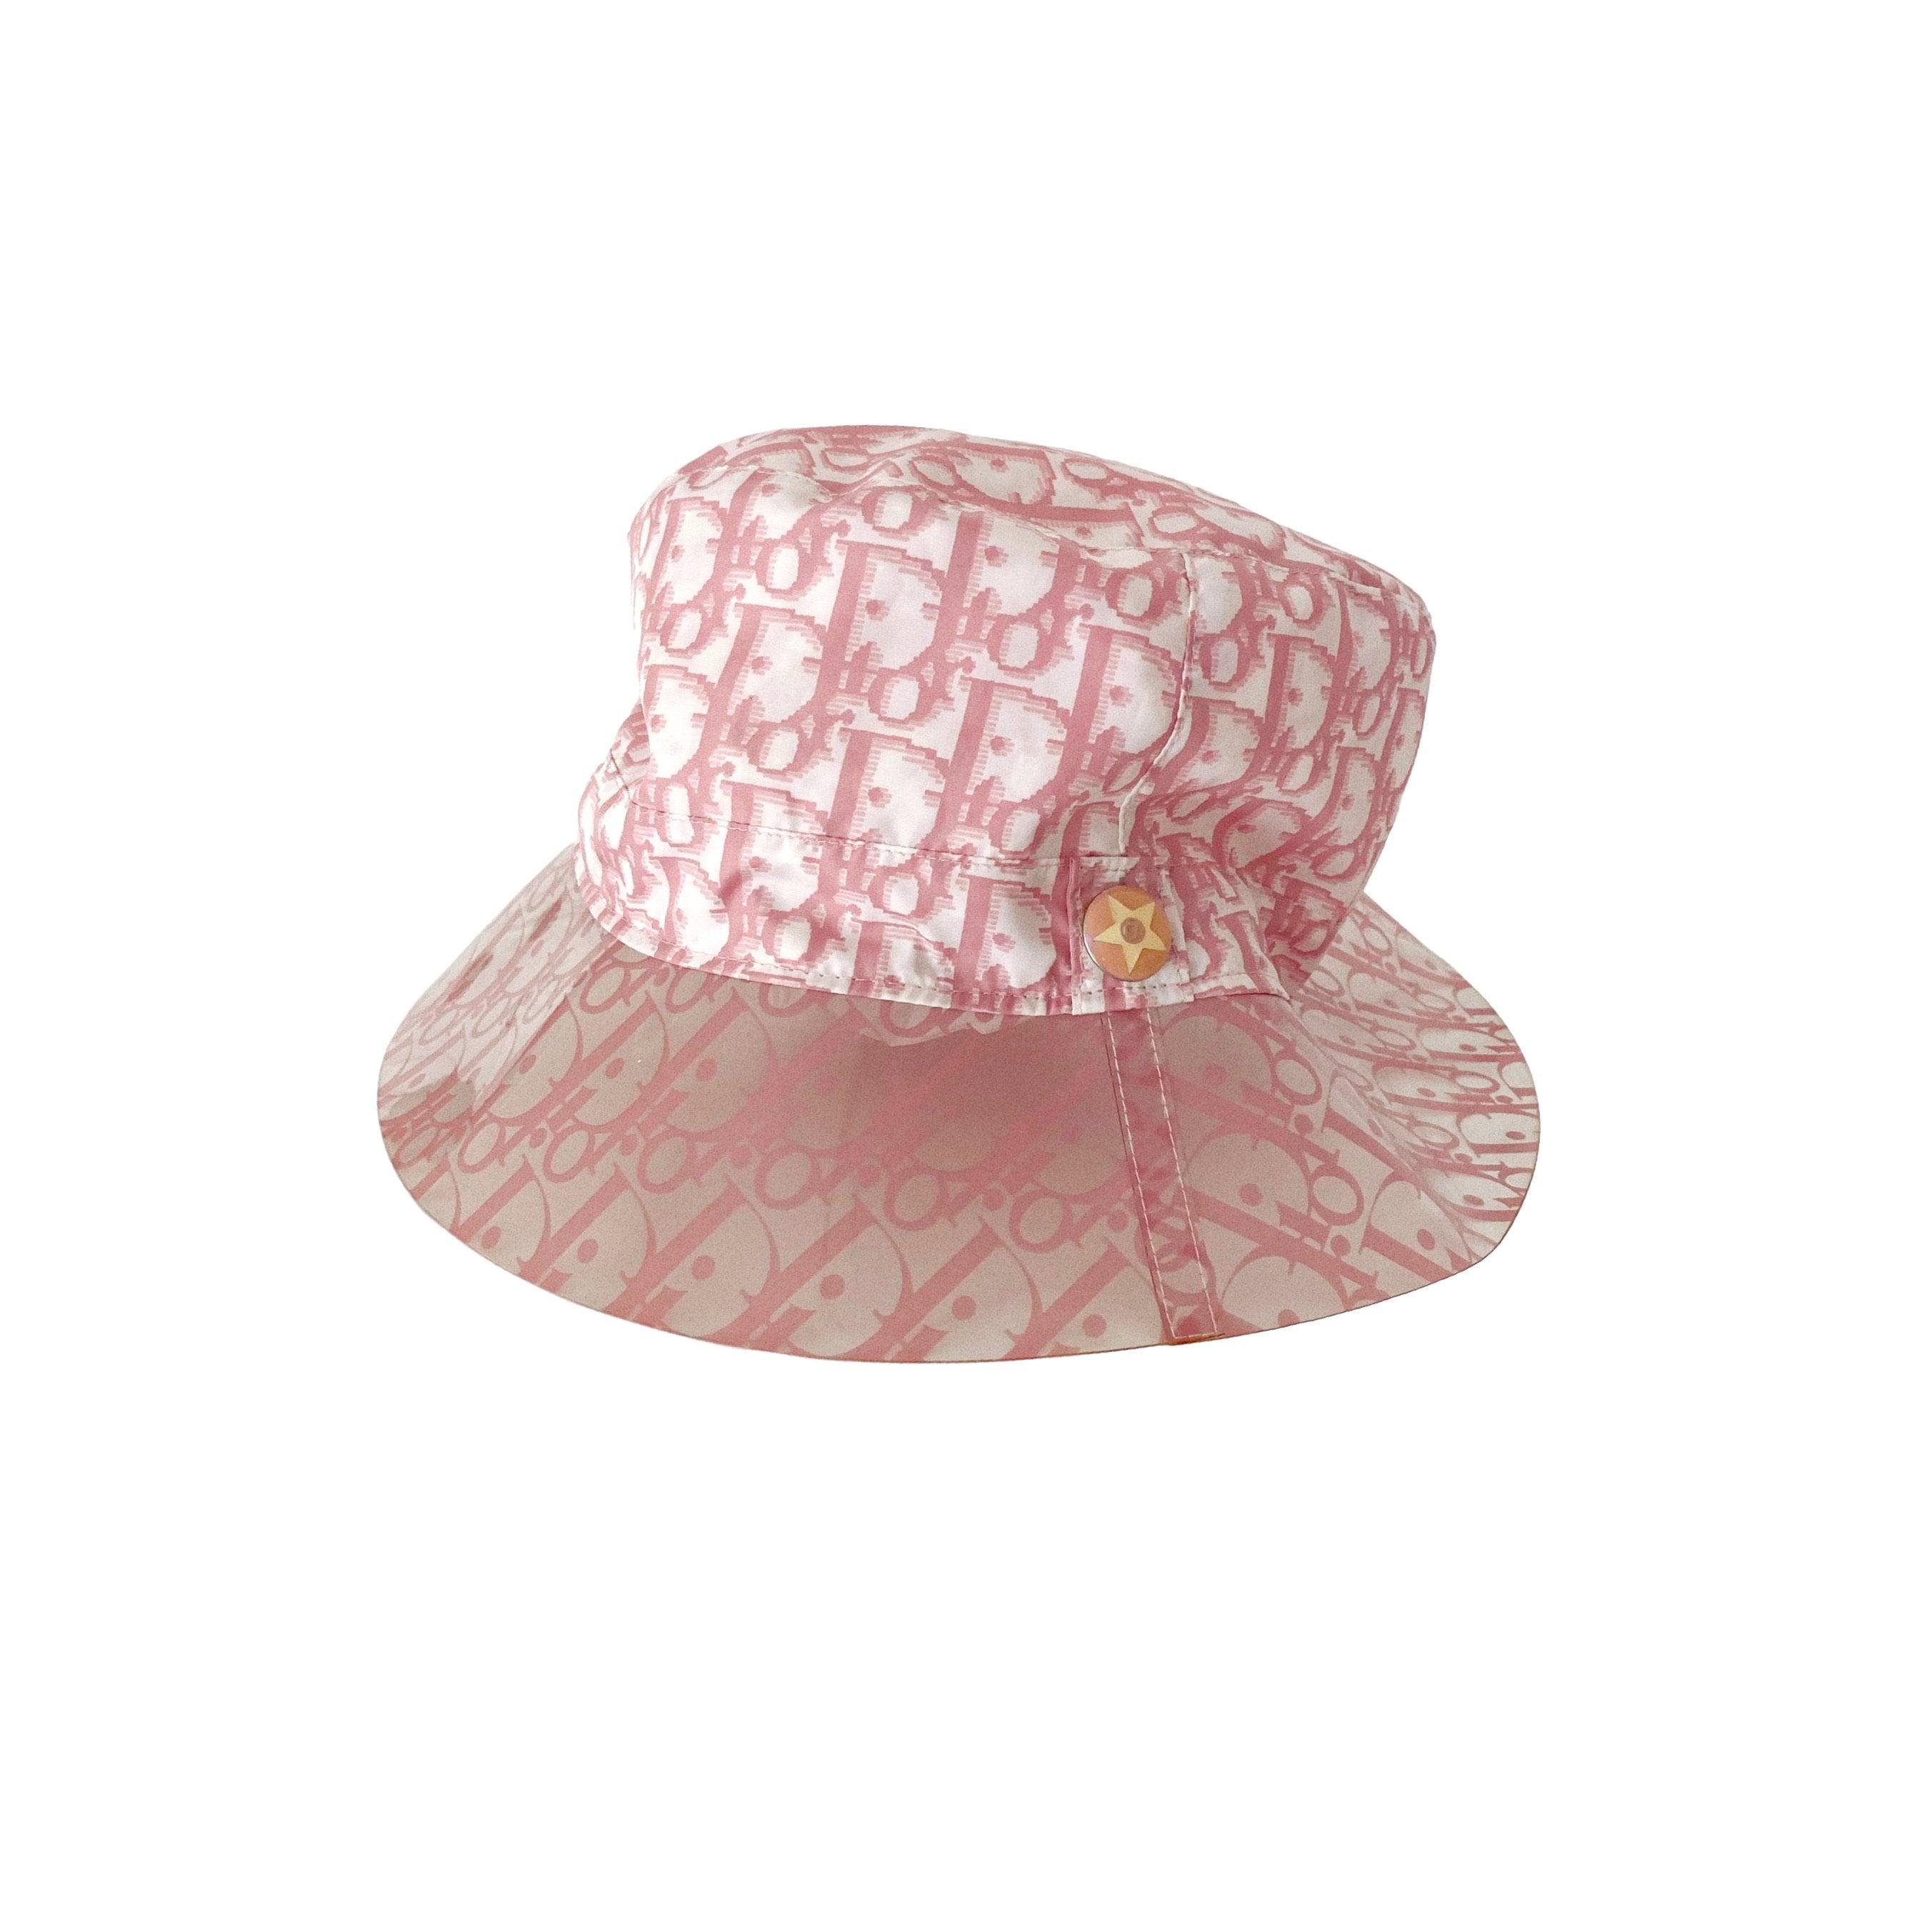 CHRISTIAN DIOR BOUTIQUE PINK TROPICAL BUCKET HAT